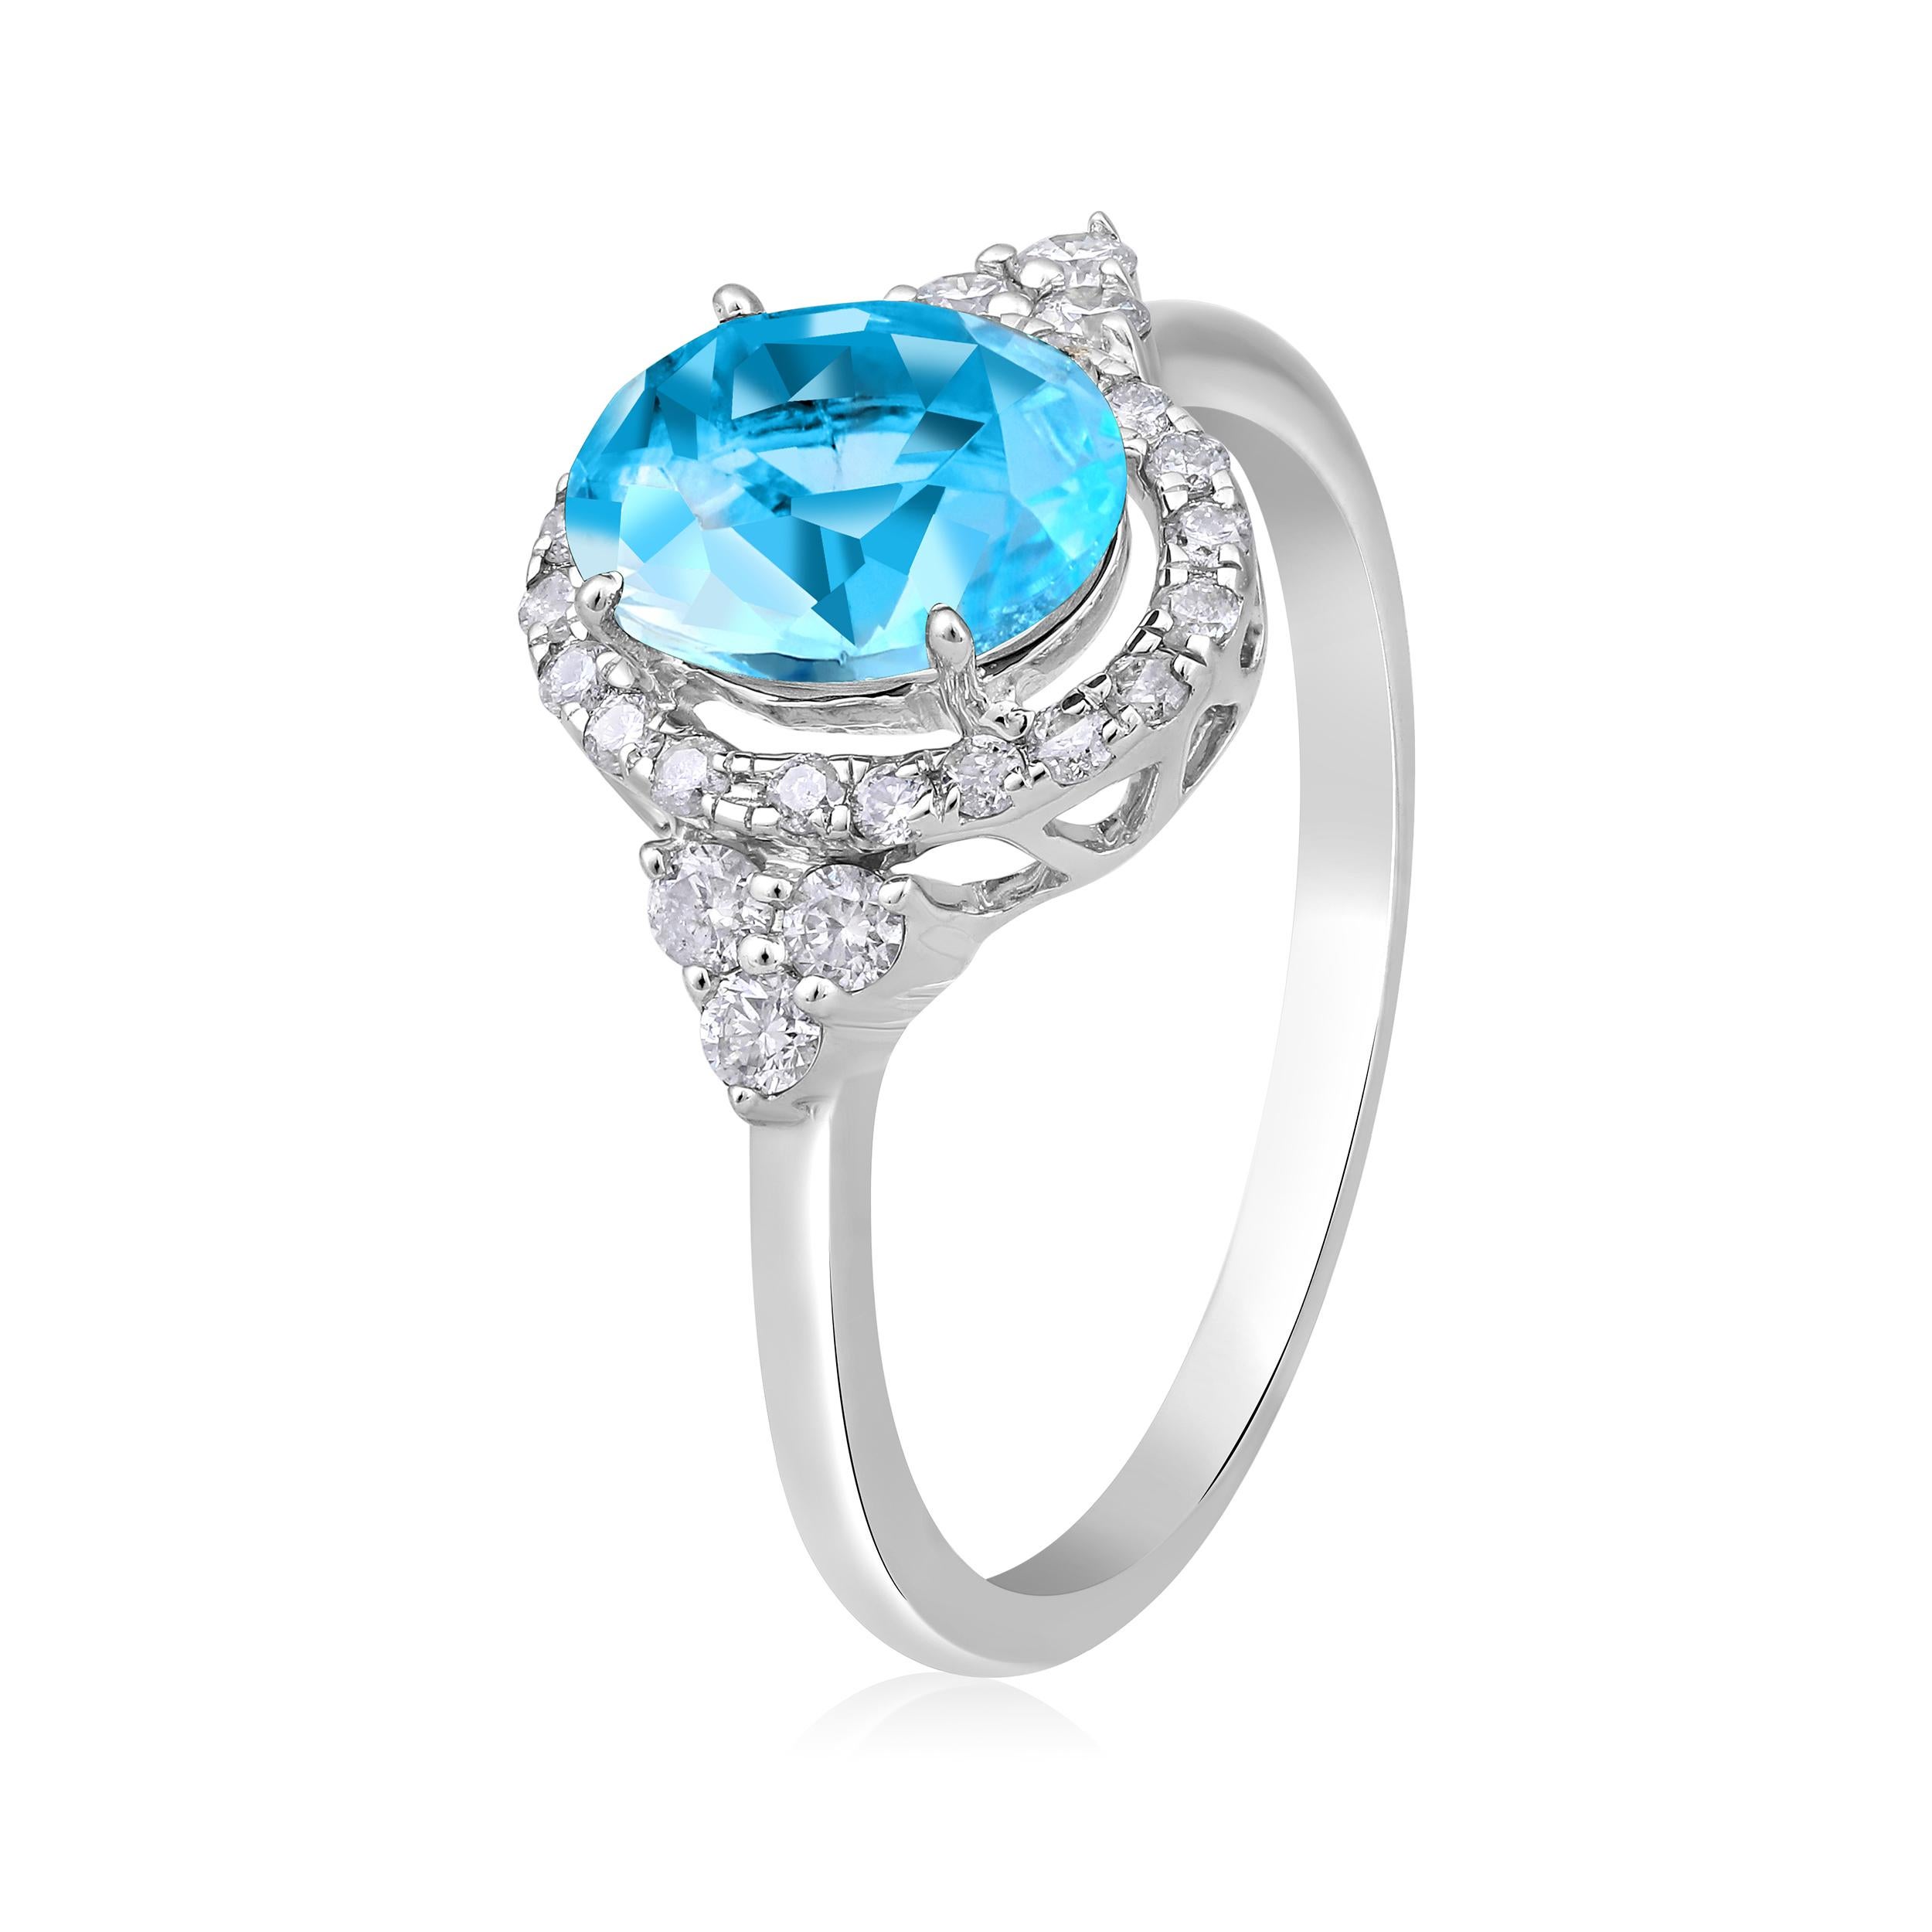 Ring Size: US 7 

Crafted in 2.6 grams of 10K White Gold, the ring contains 26 stones of Round Diamonds with a total of 0.301 carat in F-G color and I1-I2 clarity combined with 1 stone of Lab Created Aquamarine Gemstone with a total of 0.934